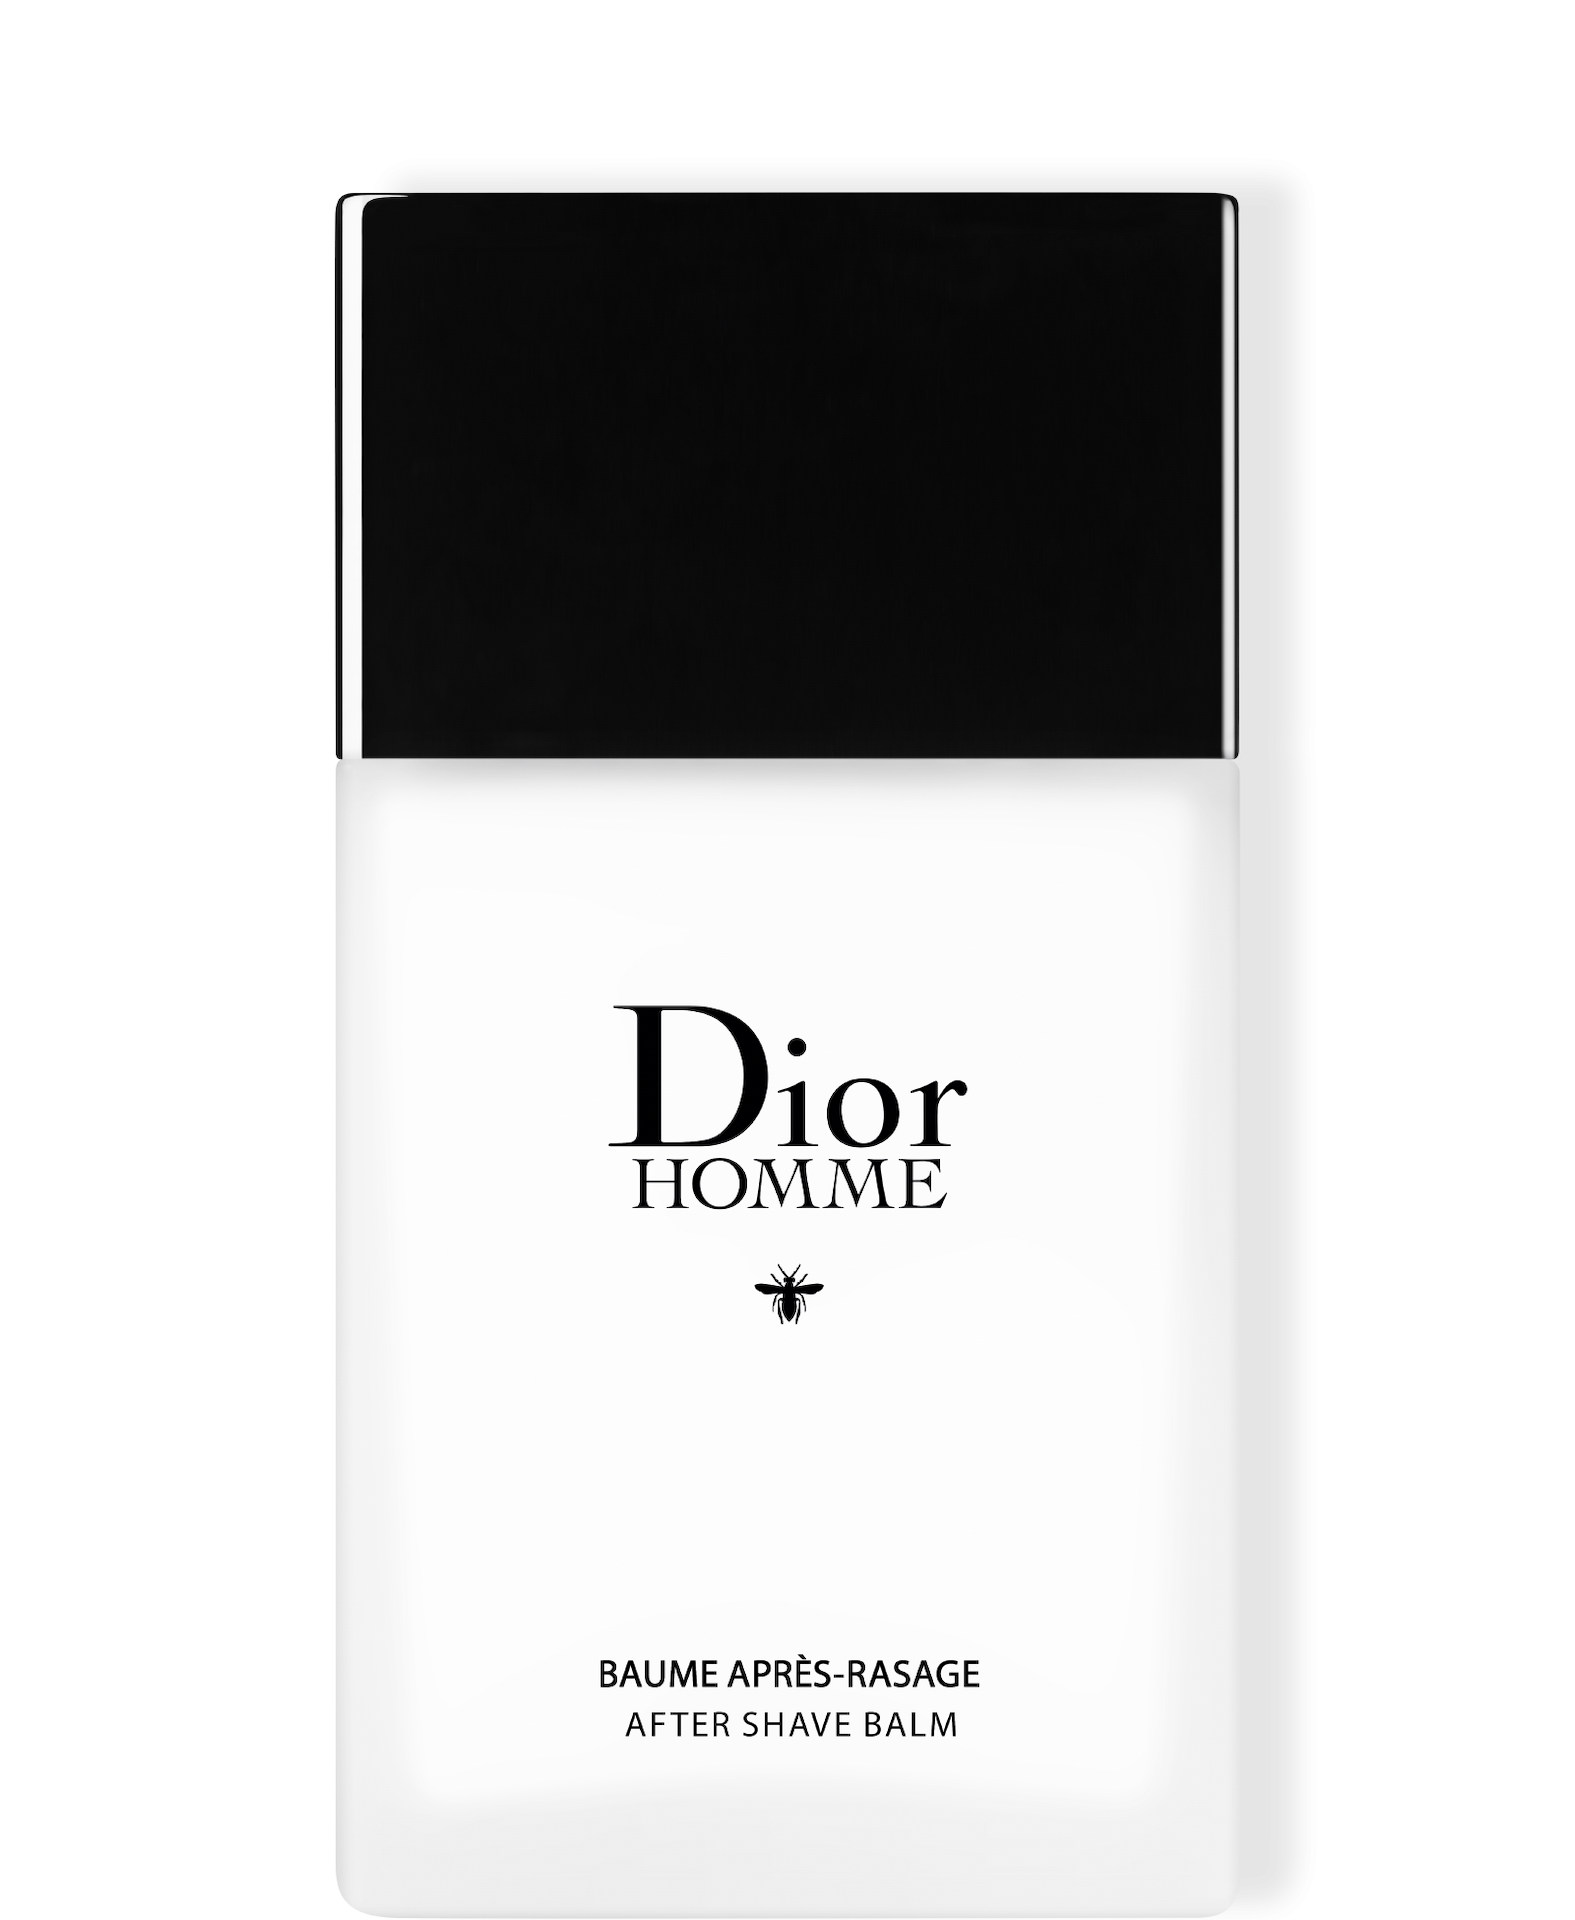 Christian Dior Homme After Shave Balm